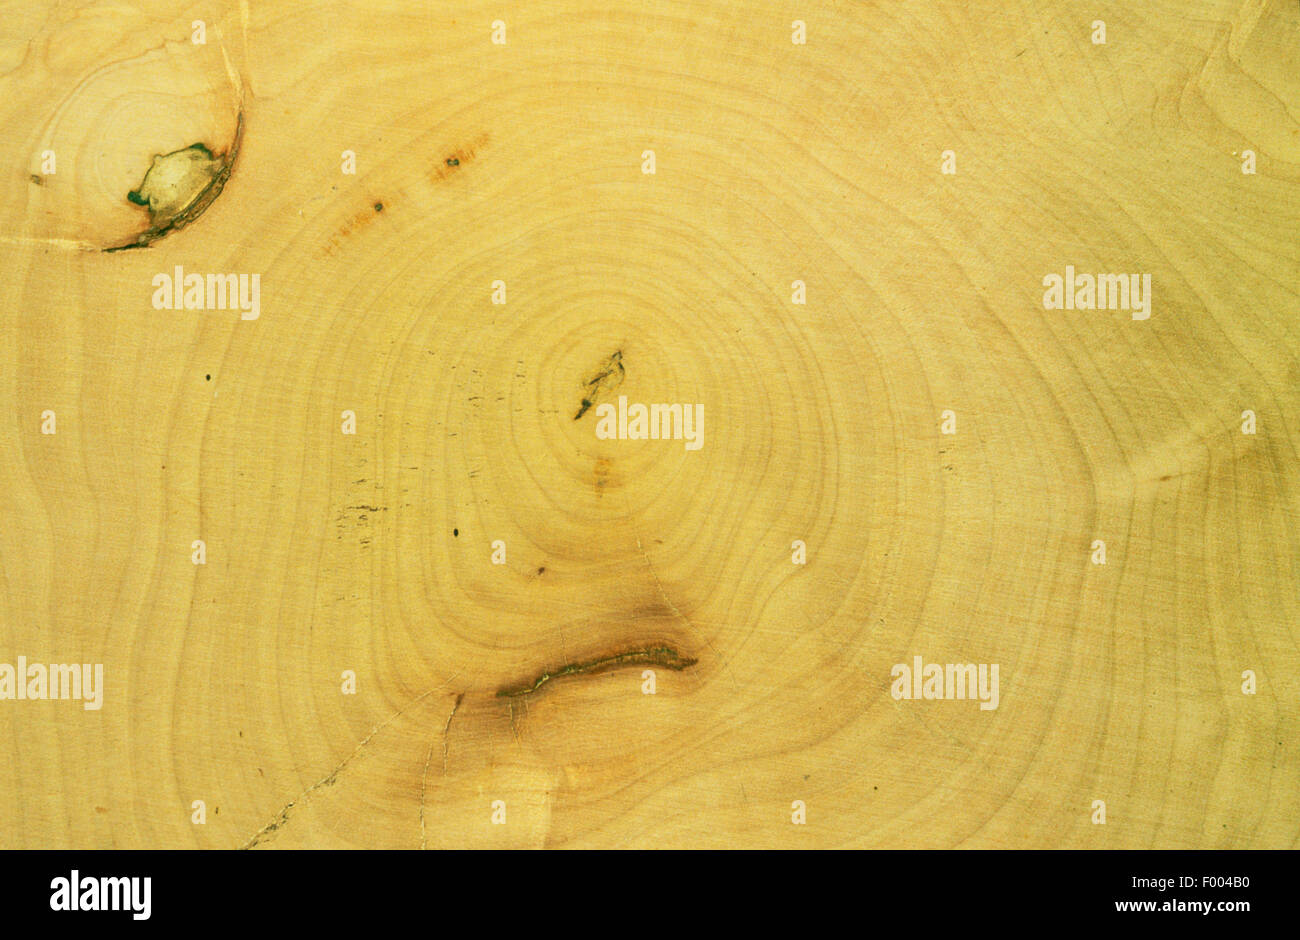 sycamore maple, great maple (Acer pseudoplatanus), trunk, cross section Stock Photo